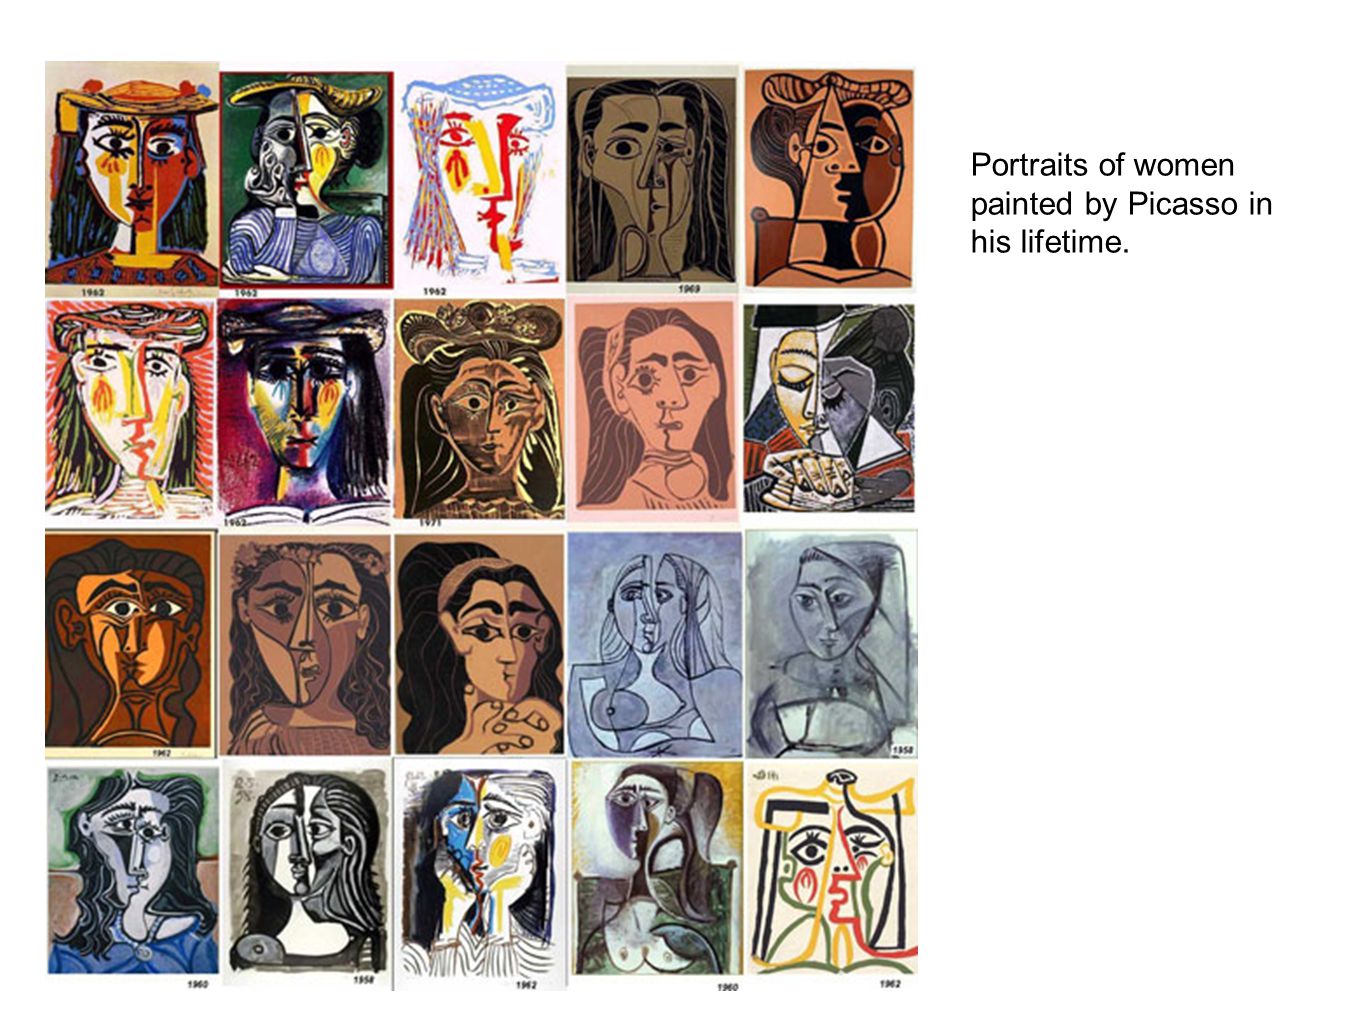 Portraits of women painted by Picasso in his lifetime.